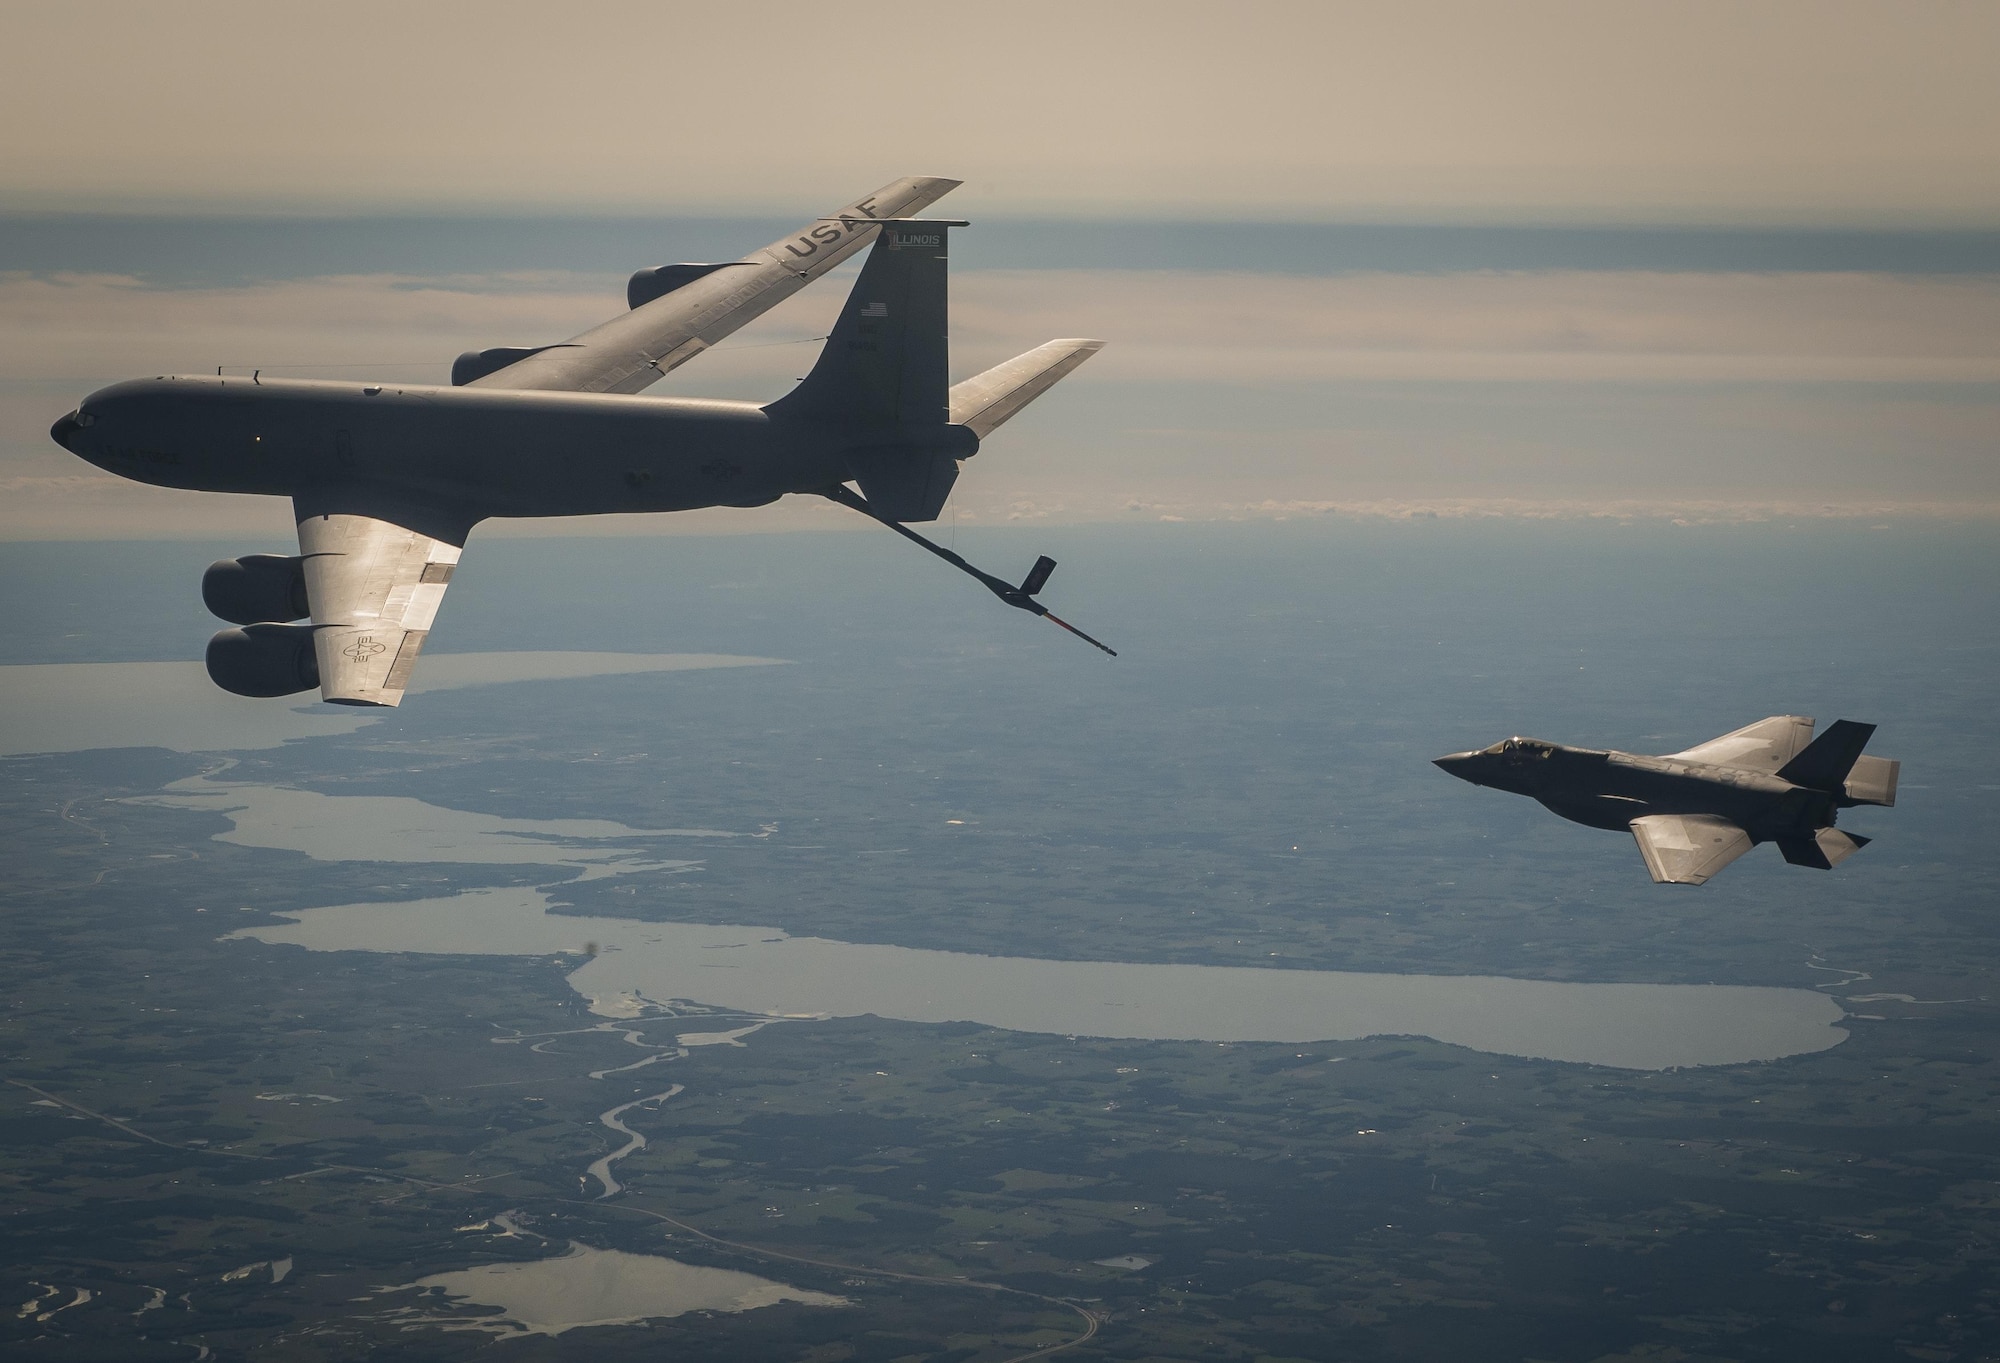 A 33rd Fighter Wing F-35A Lighting II approaches a 126th Air Refueling Wing KC-135 Stratotanker to refuel during Exercise Northern Lighting Aug. 31, 2016. Northern Lightning is a tactical-level, joint training exercise that emphasizes fifth and fourth generation assets engaged in a contested, degraded environment. (U.S. Air Force photo/Staff Sgt. DeAndre Curtiss)
